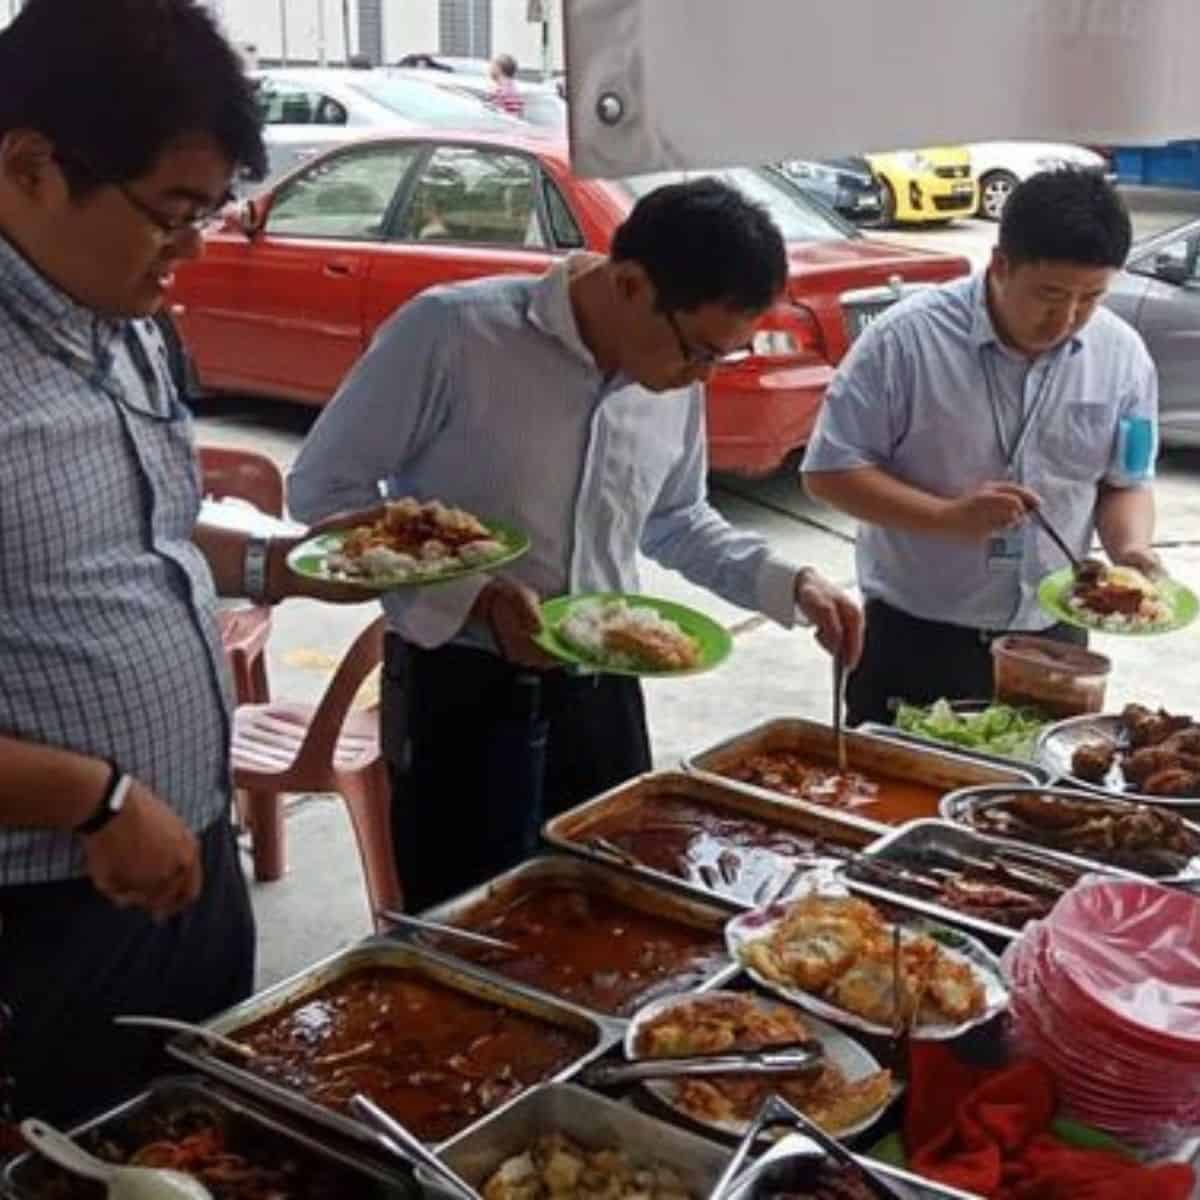 Employees lining up at Kak Ema's stall for lunch with different Malaysian food trays to be selected